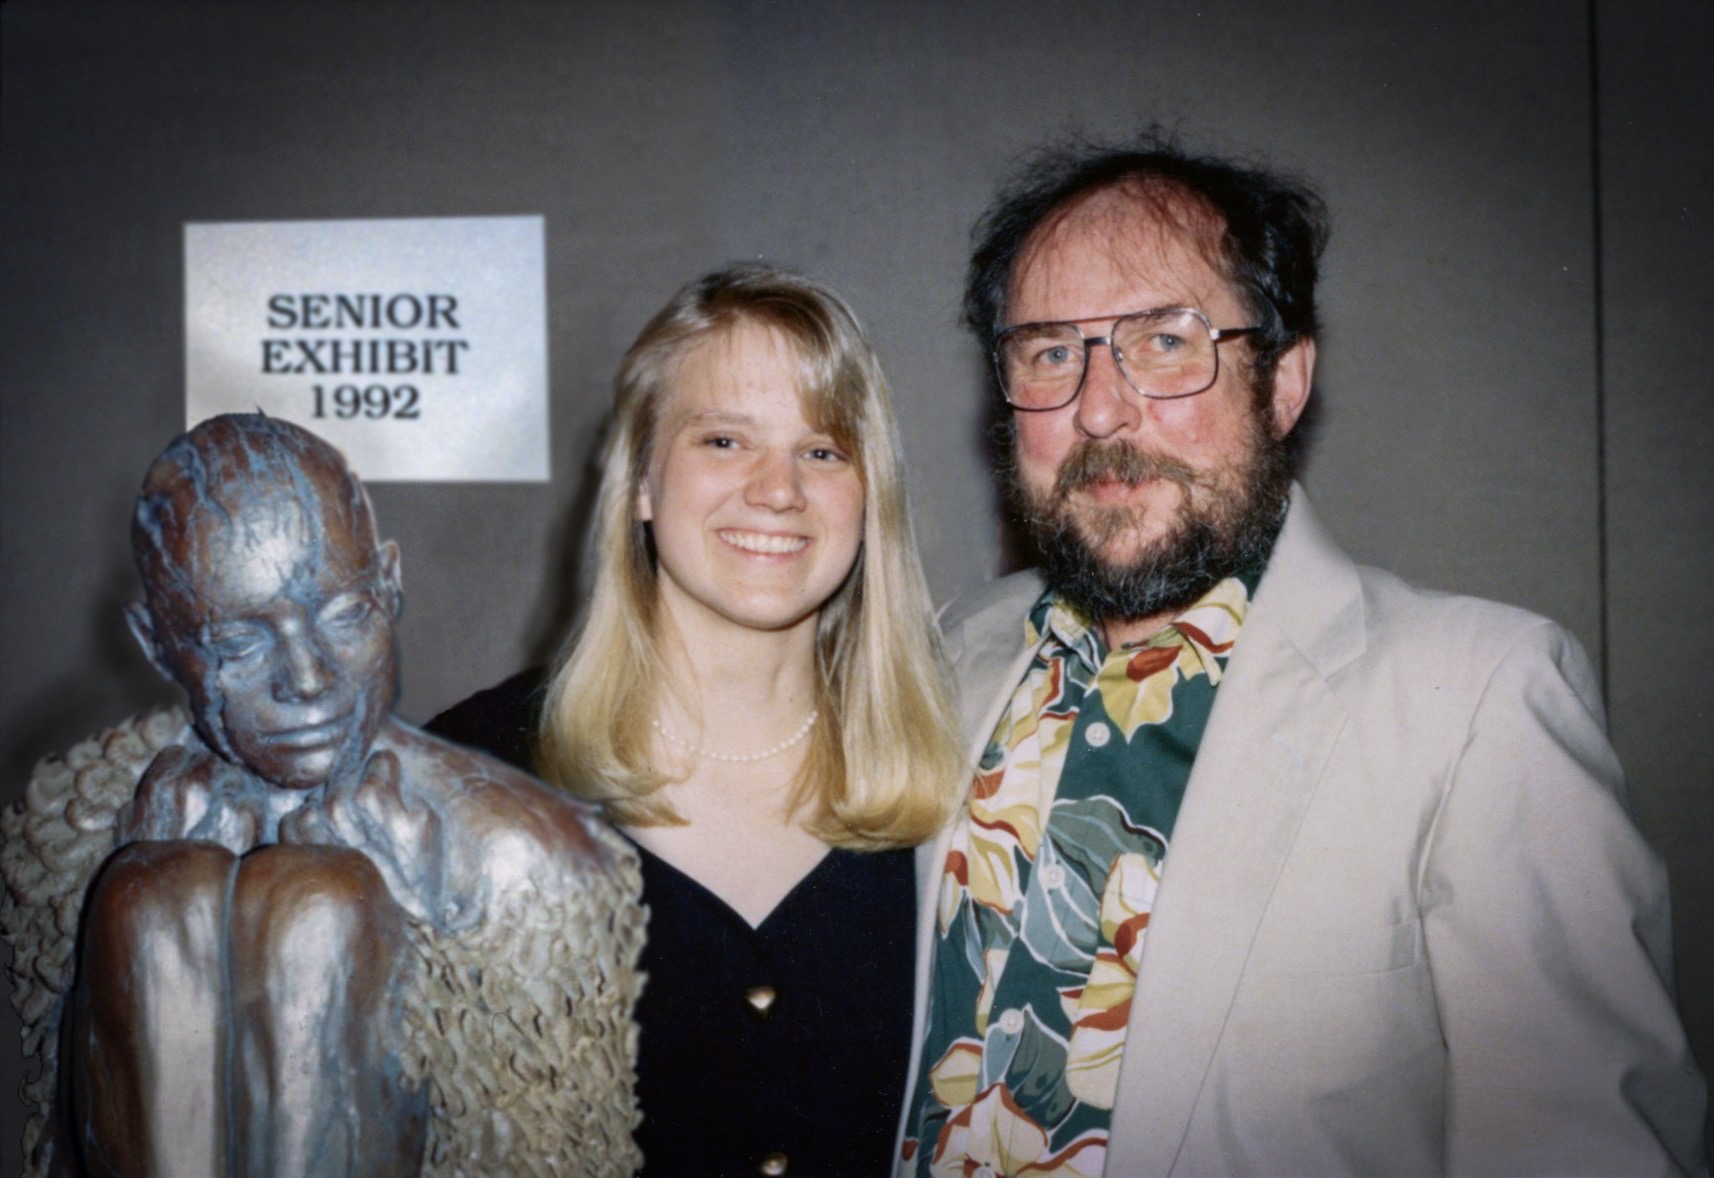 Poole with Marvin Zehnder at her NMU senior exhibition (Poole photo)